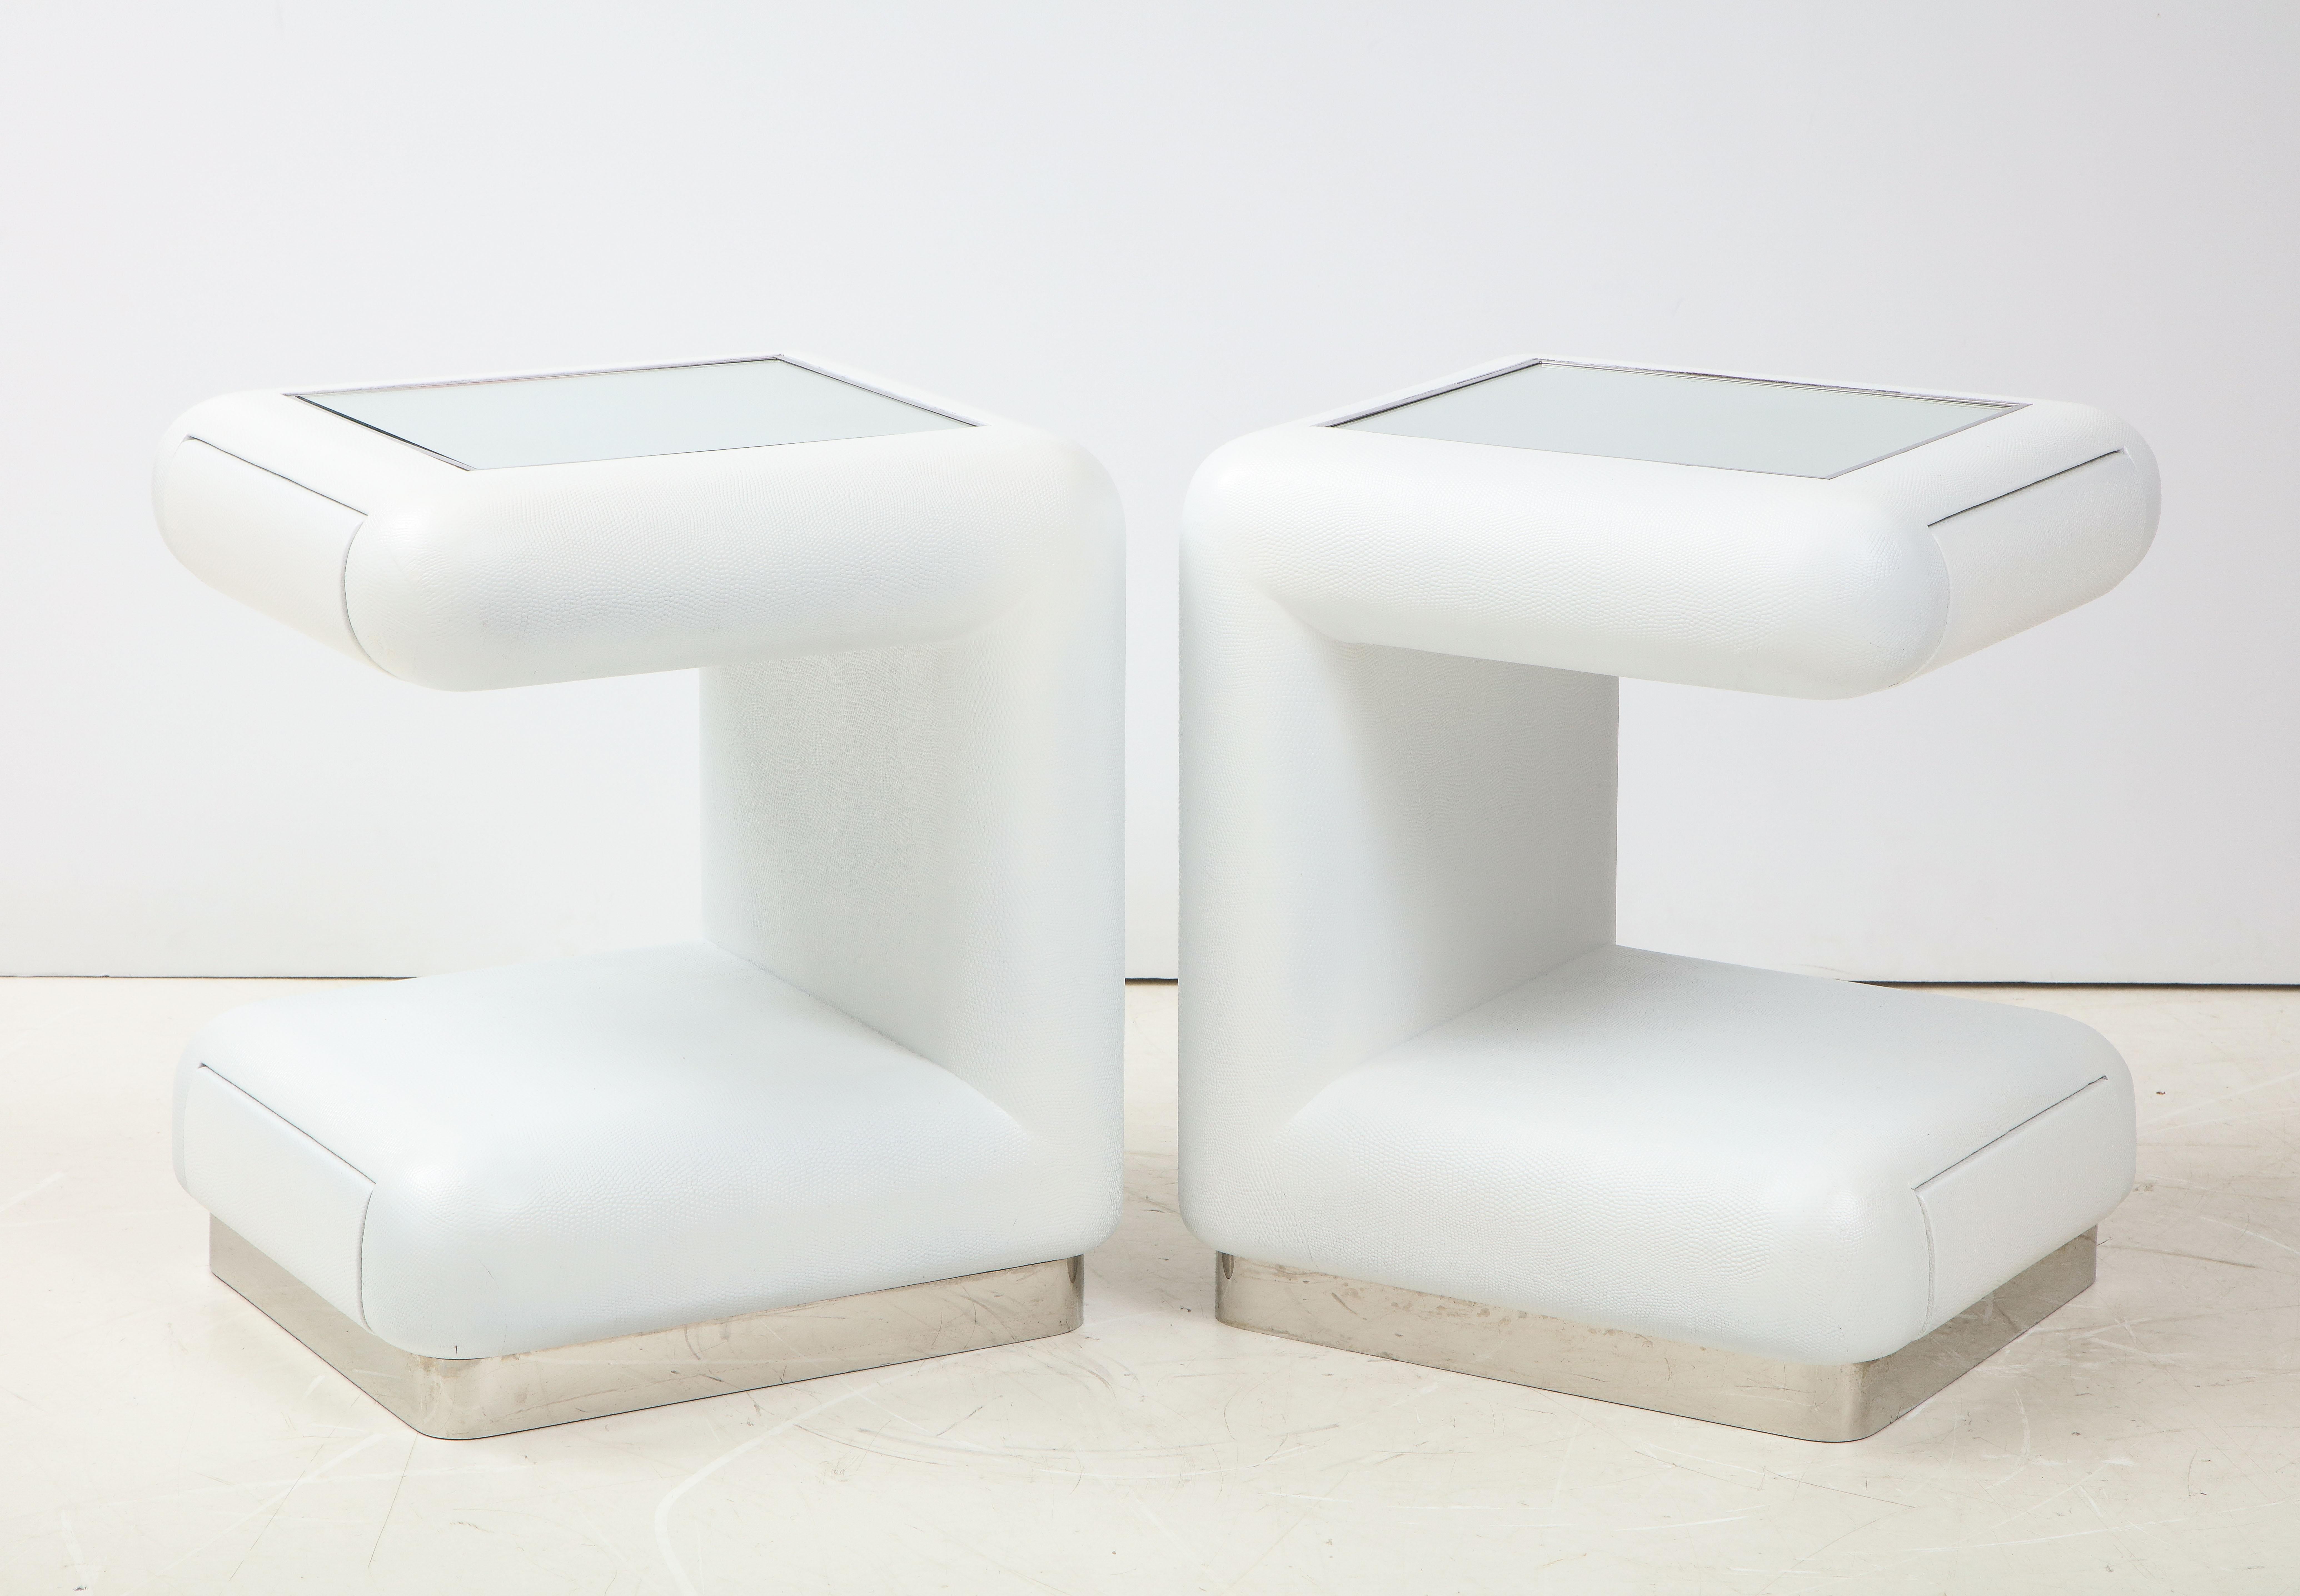 Pair of Ron Seff night stands / End table that are covered in white leather.
The tables have mirrored tops framed by a thin chrome trim and each have two drawers.